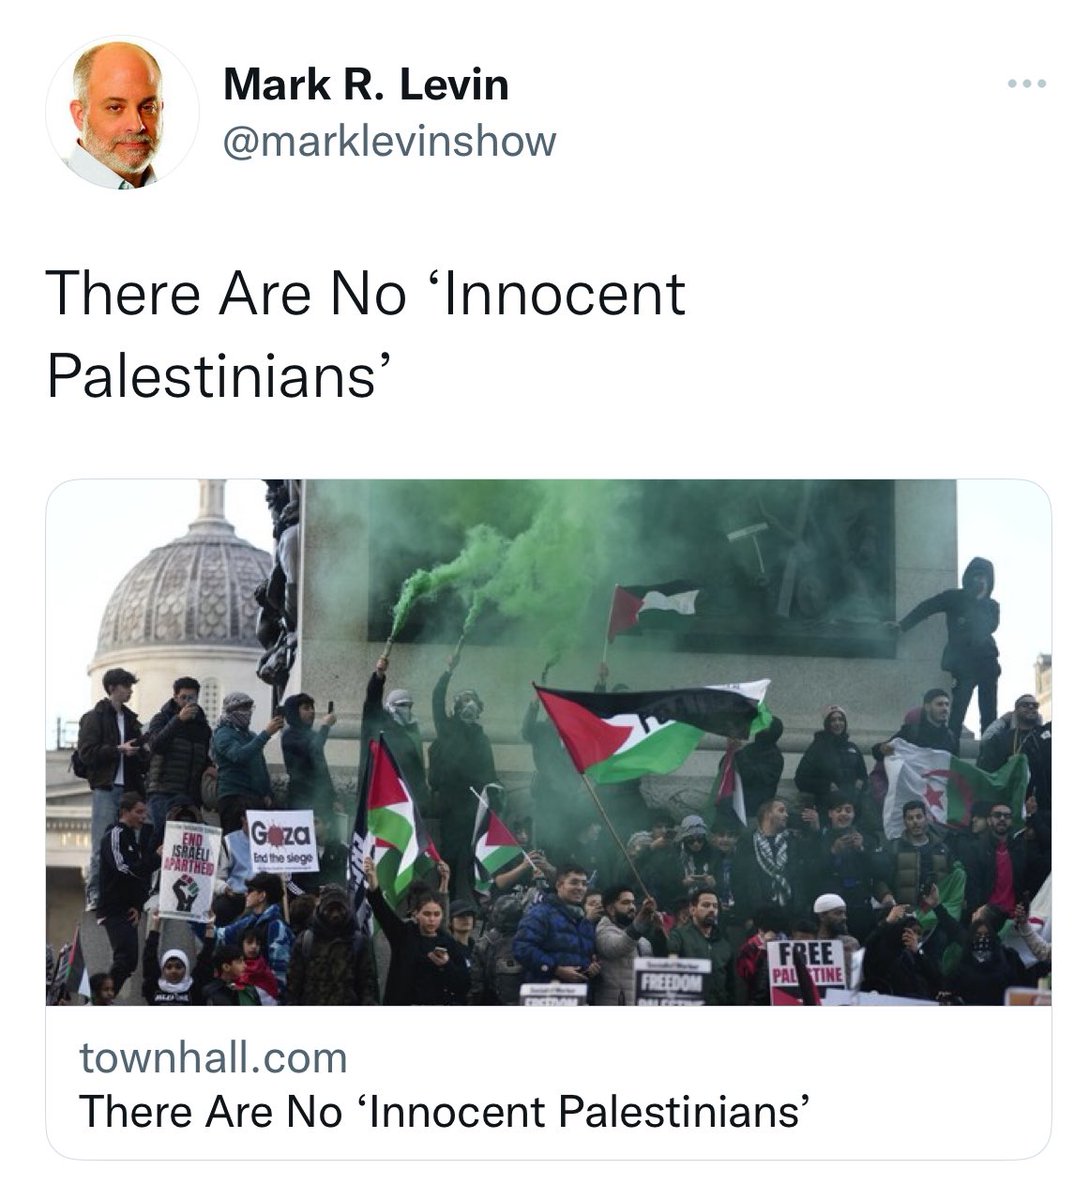 When people speak about another collectively in this way,it spreads racism&hate,It is an incitement of discrimination,dehumanization & fear. It is dehumanization of a group based on national origin,race & religion. Shame on U @marklevinshow U R the problem #antipalestinianracism